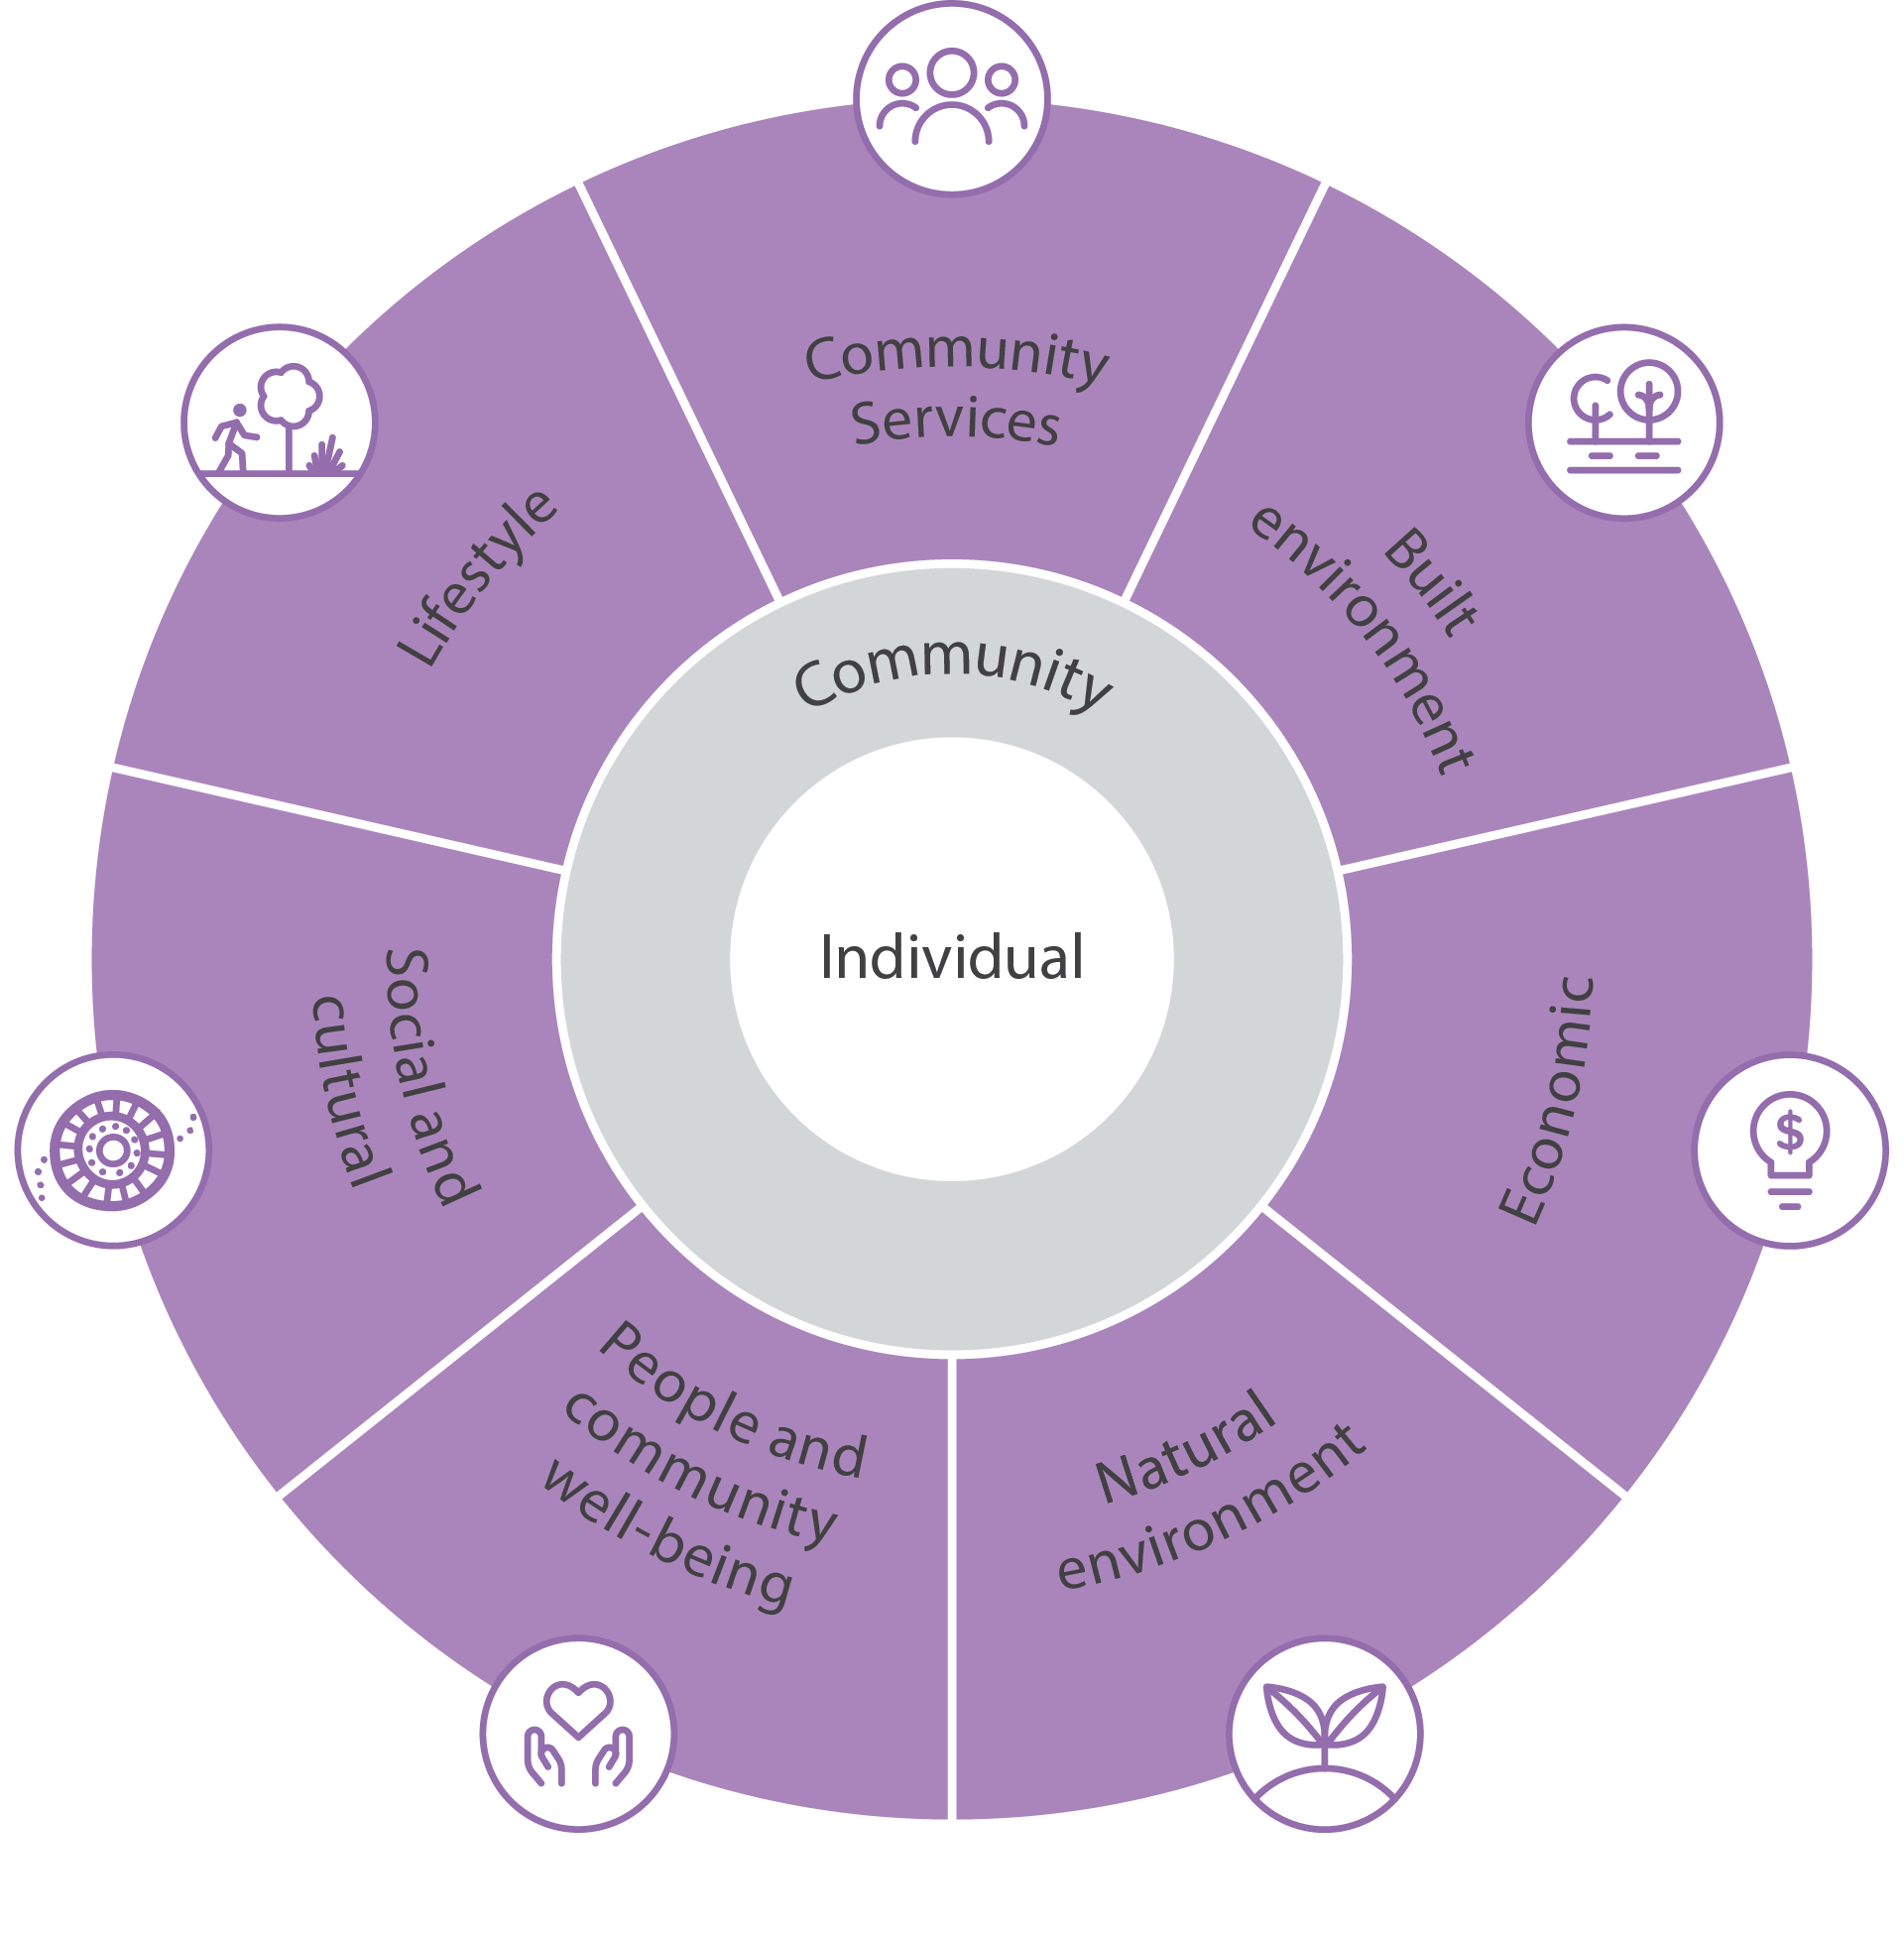 Examples of modifiable determinants of health, Community Services, Lifestyle, Social and Cultural, People and community well-being, Natural environment, Economic and Built environment.